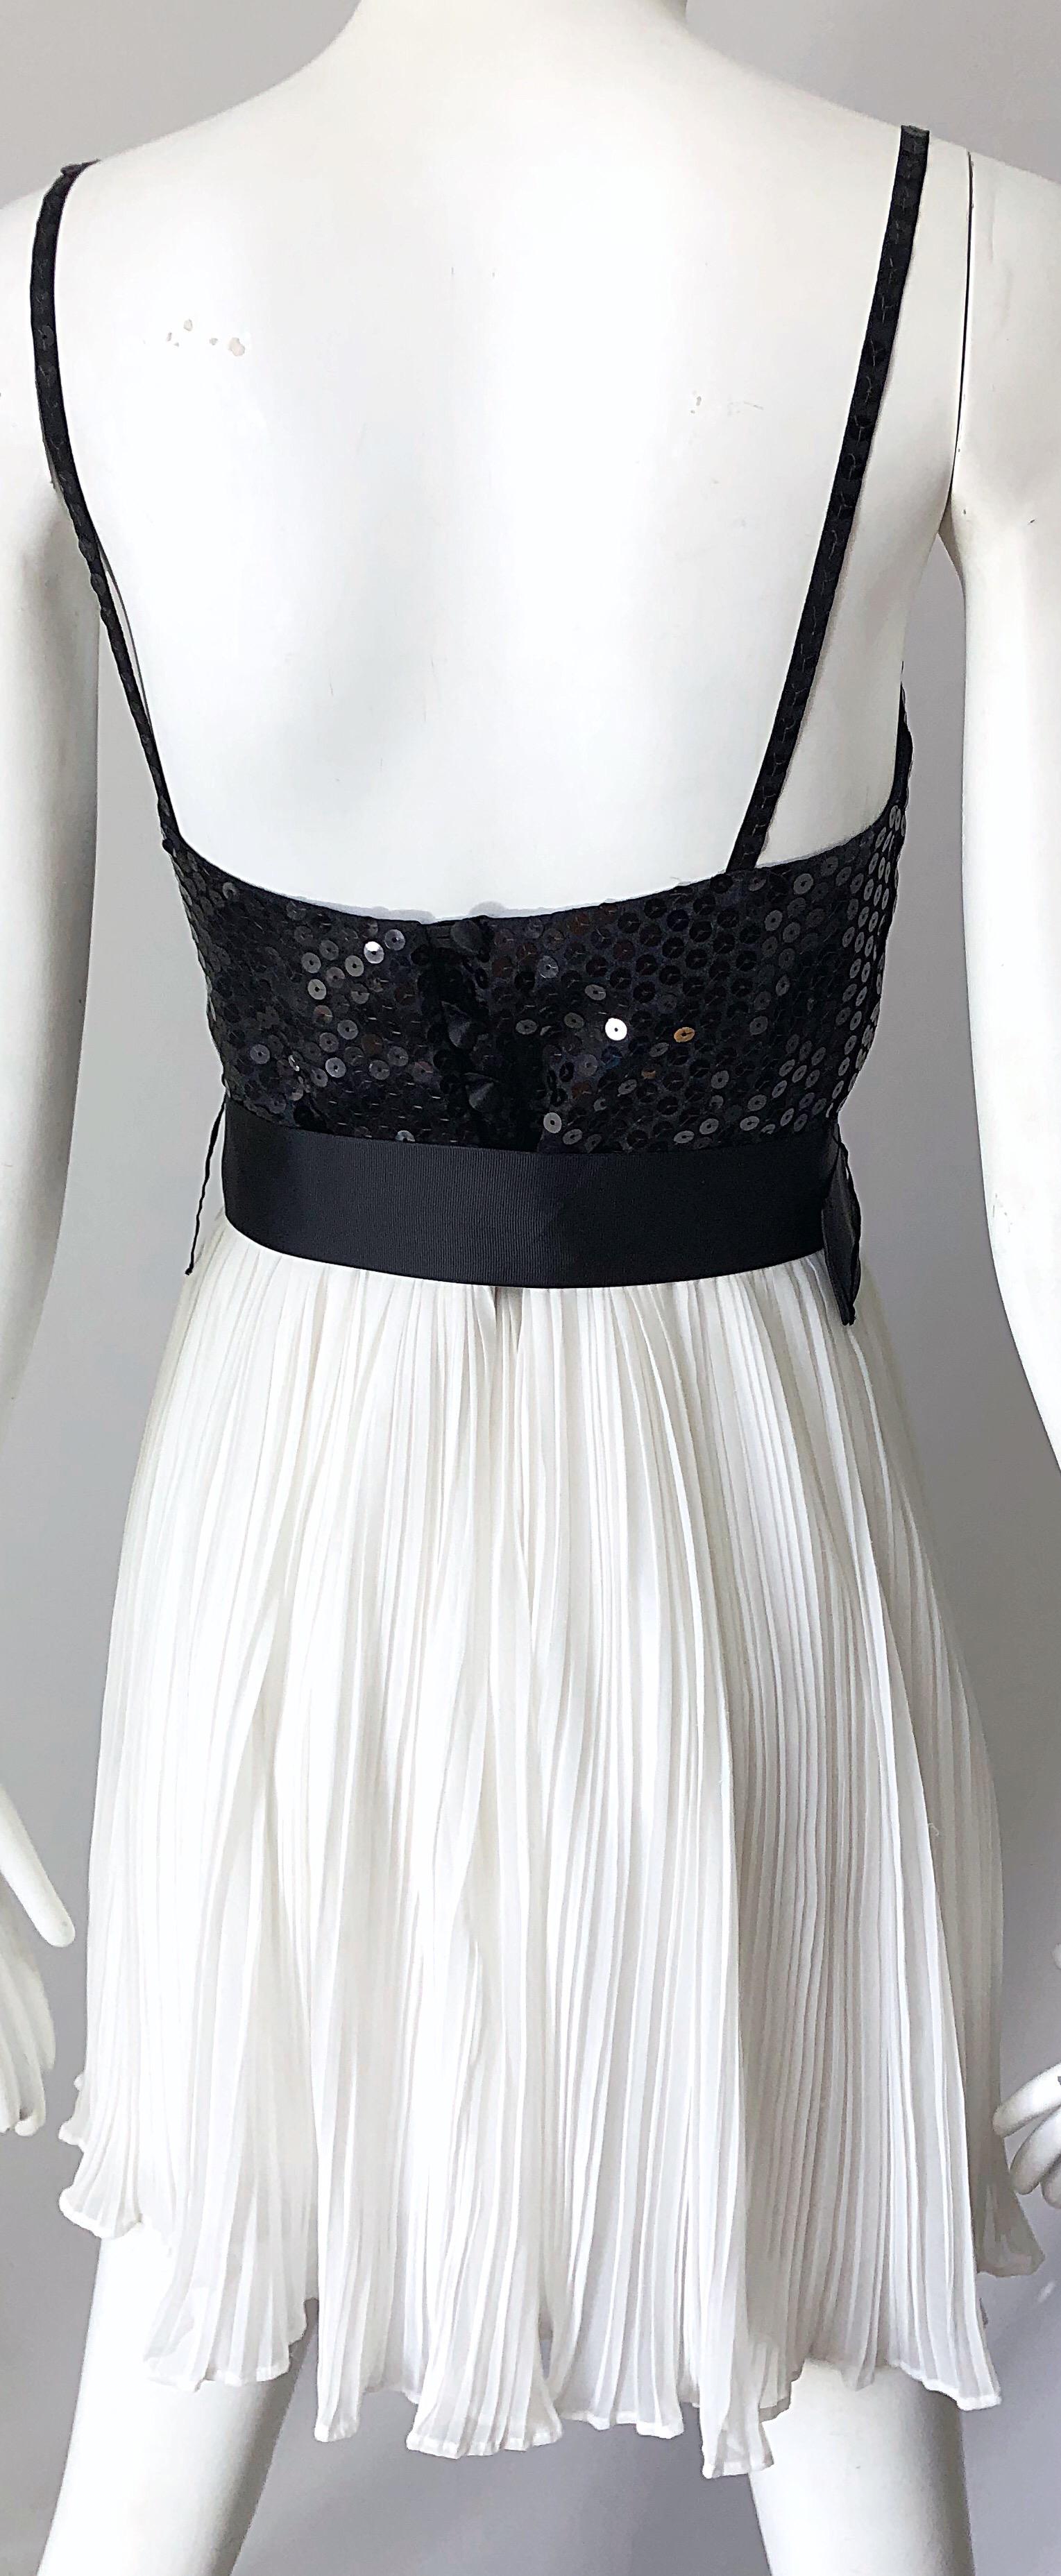 1990s Jenny Packham Black and White Sequined Silk Vintage 90s Mini Dress In Excellent Condition For Sale In San Diego, CA